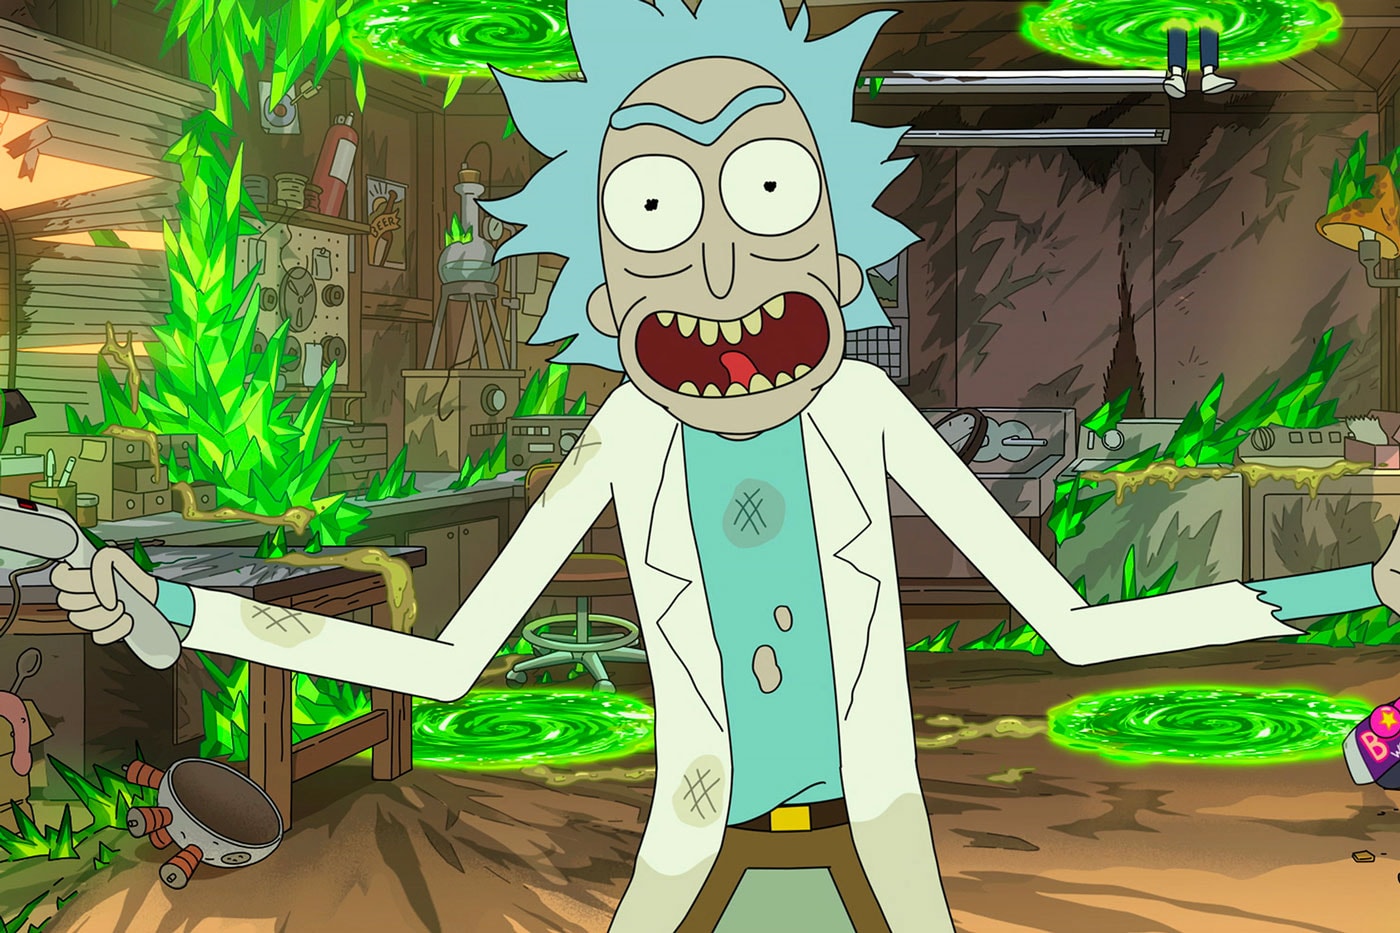 Why Is the Next Season of 'Rick and Morty' Taking So Long?